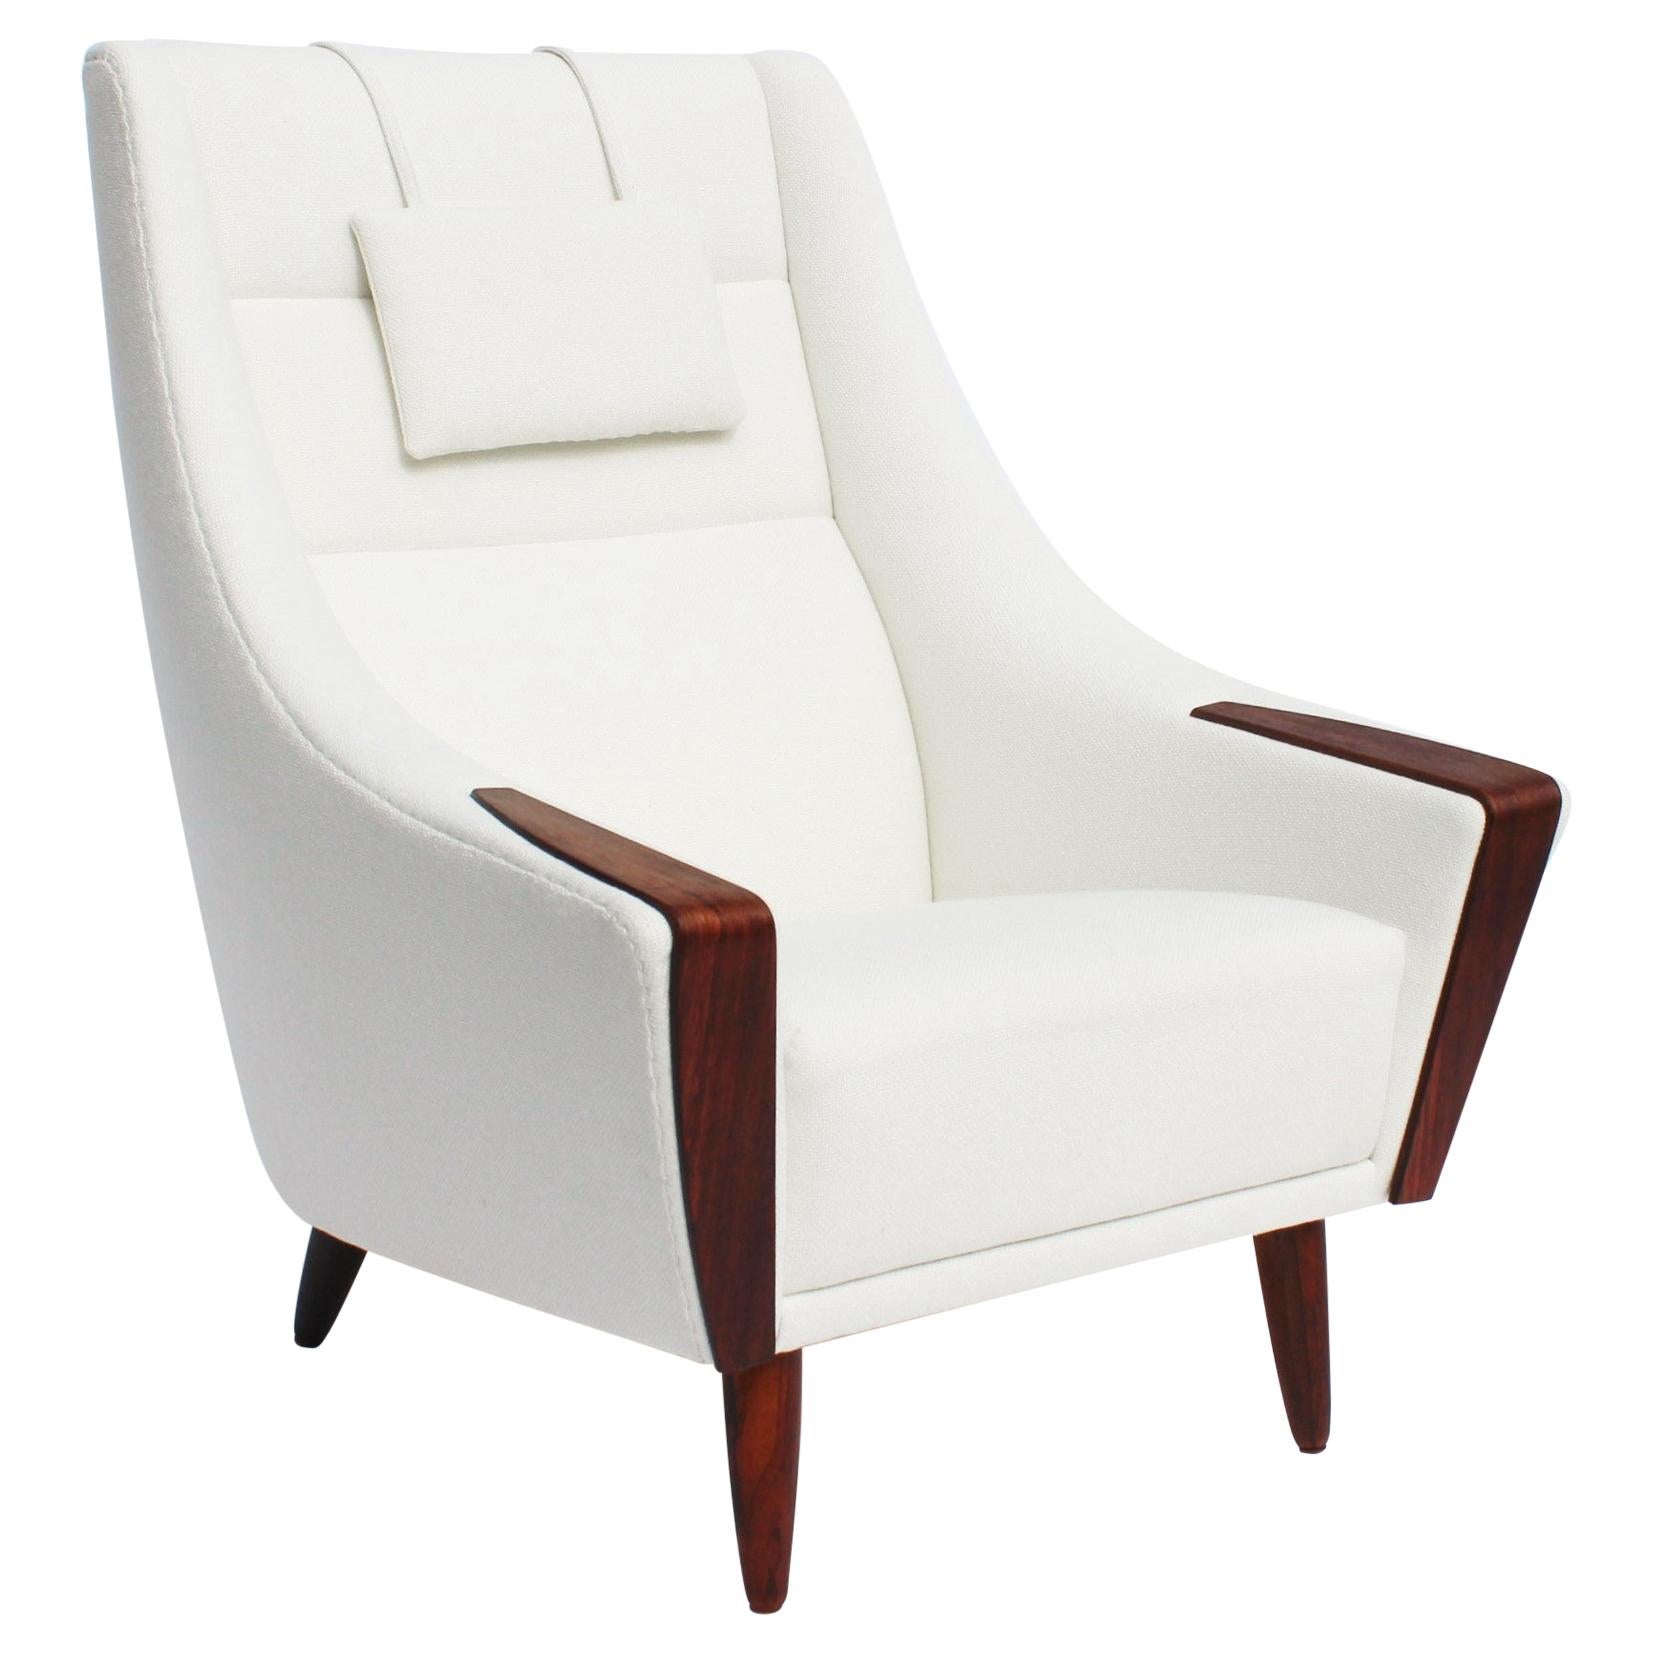 Easy Chair with Tall Back Upholstered in White Fabric, Danish Design, 1960s For Sale